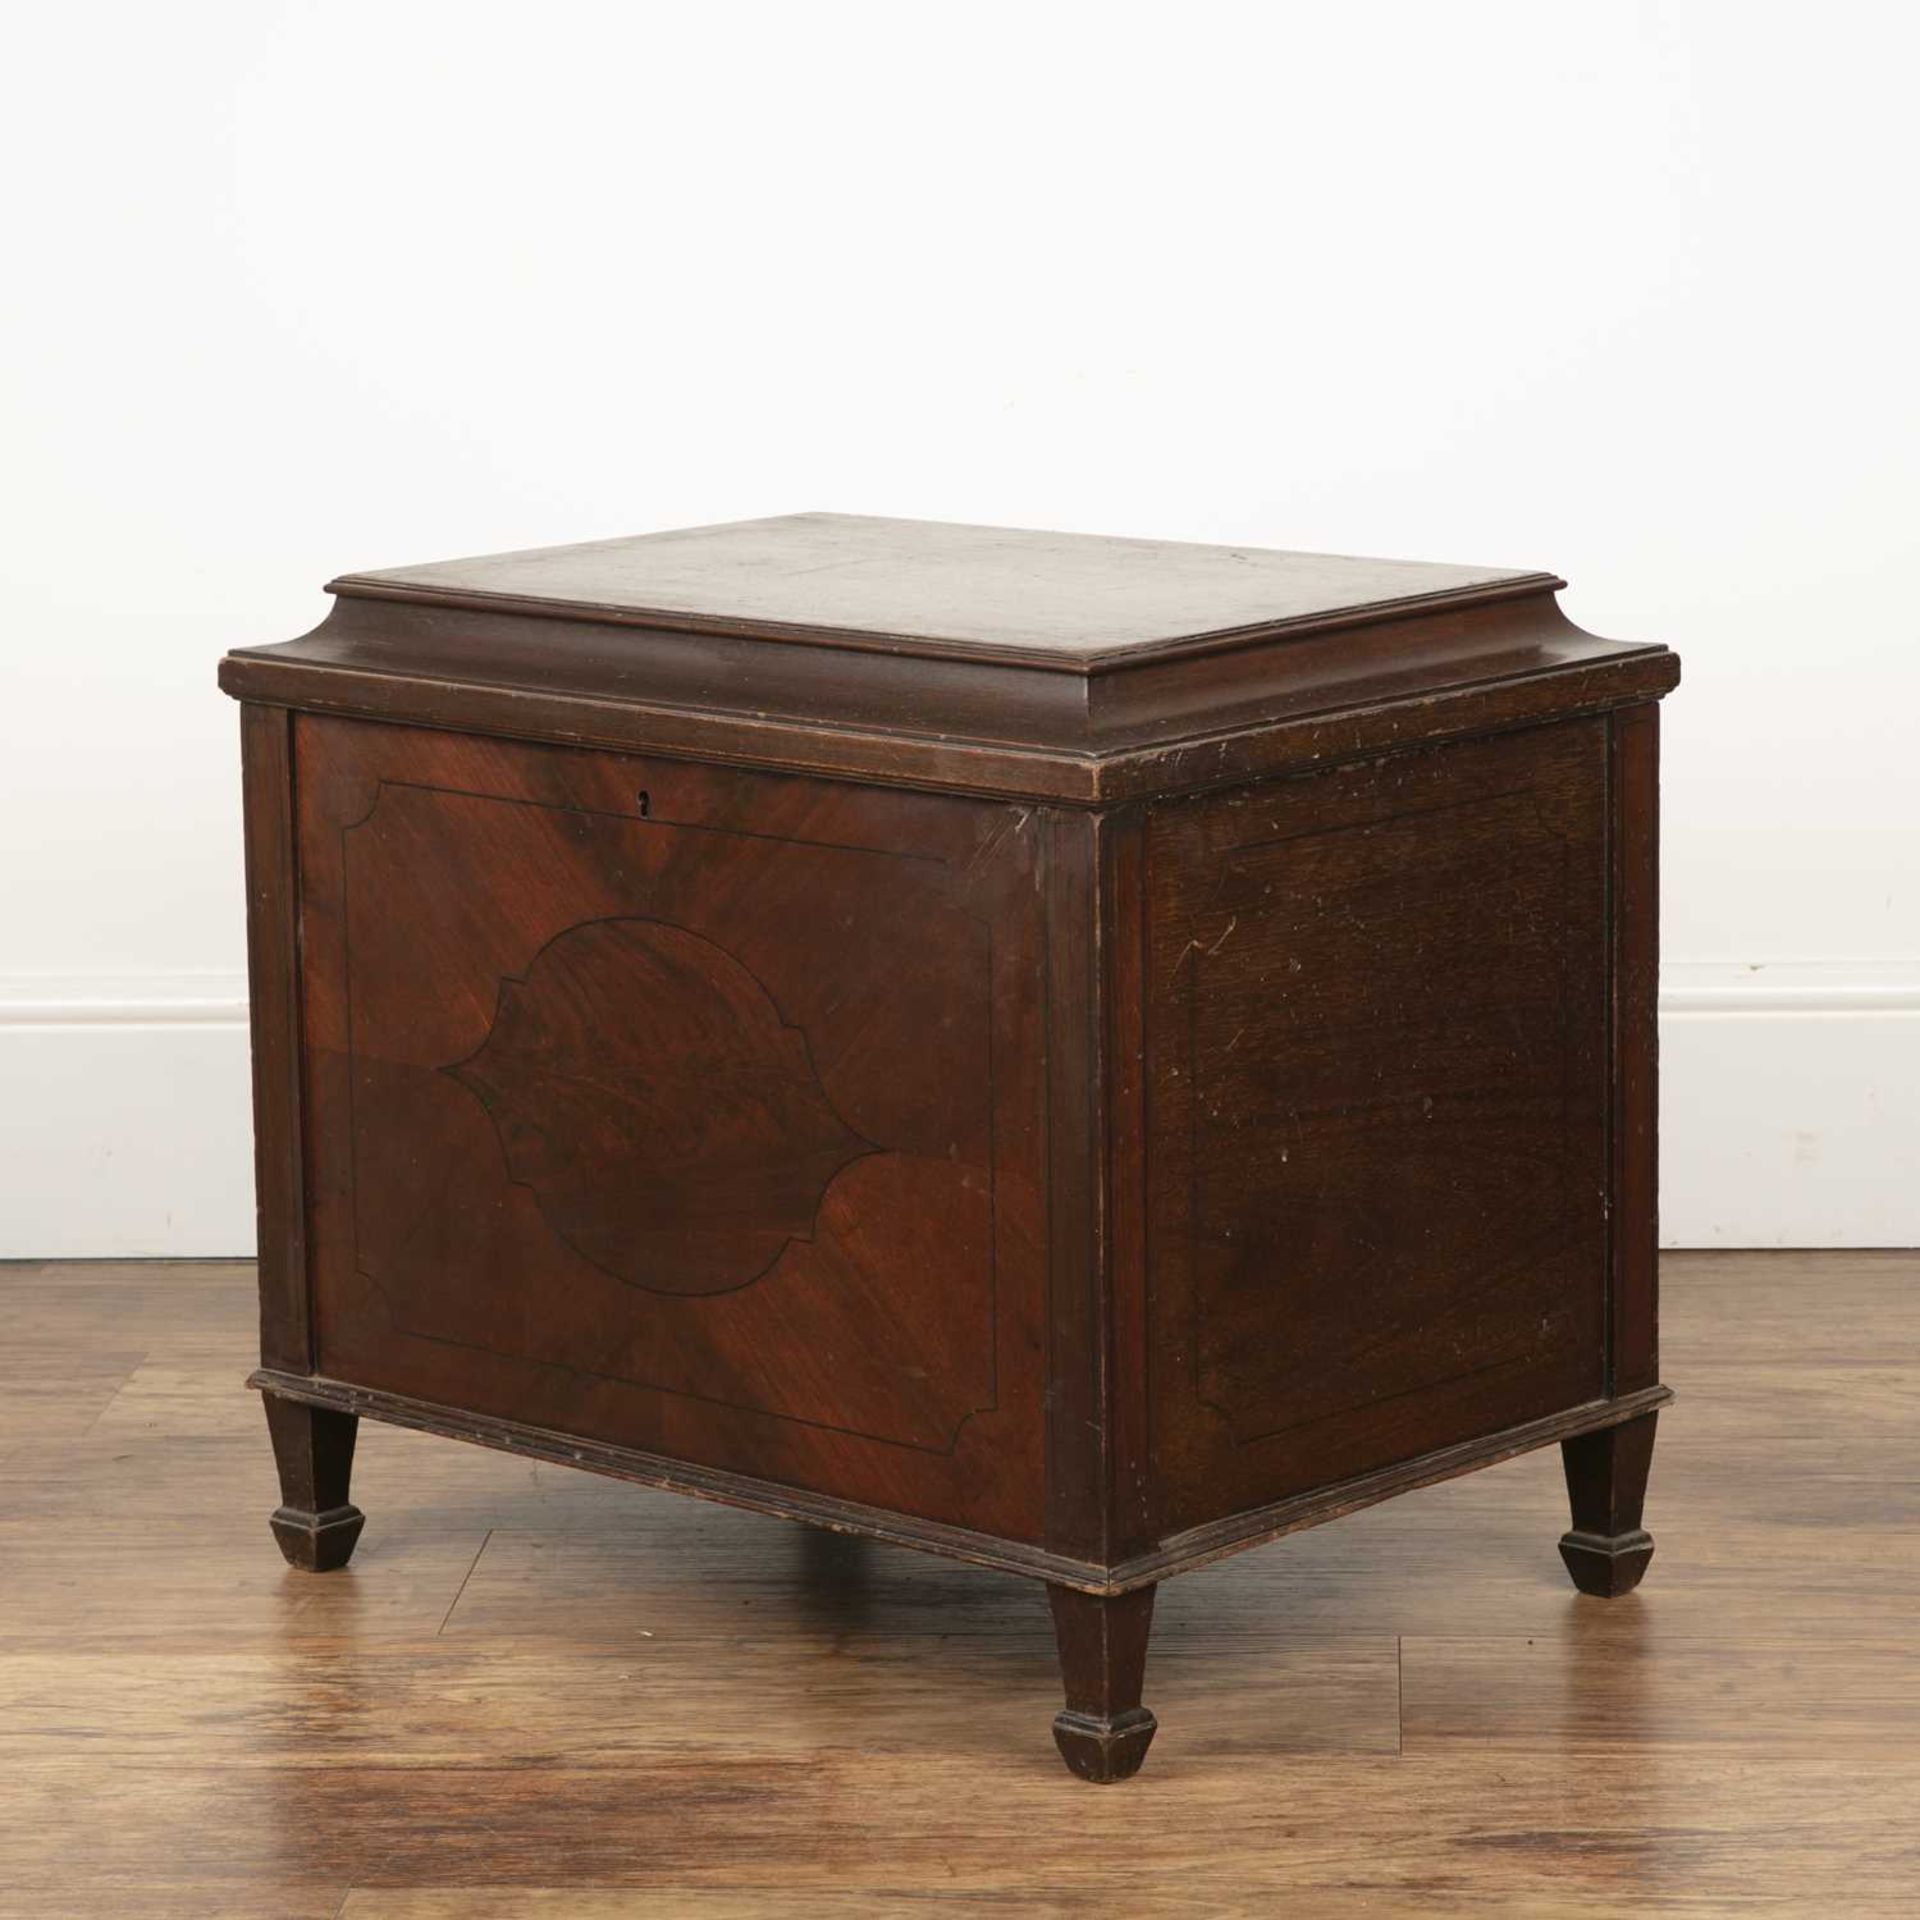 Mahogany and line inlaid cellarette 19th Century, with part lead-lined interior, 56cm wide, 41cm - Image 3 of 5